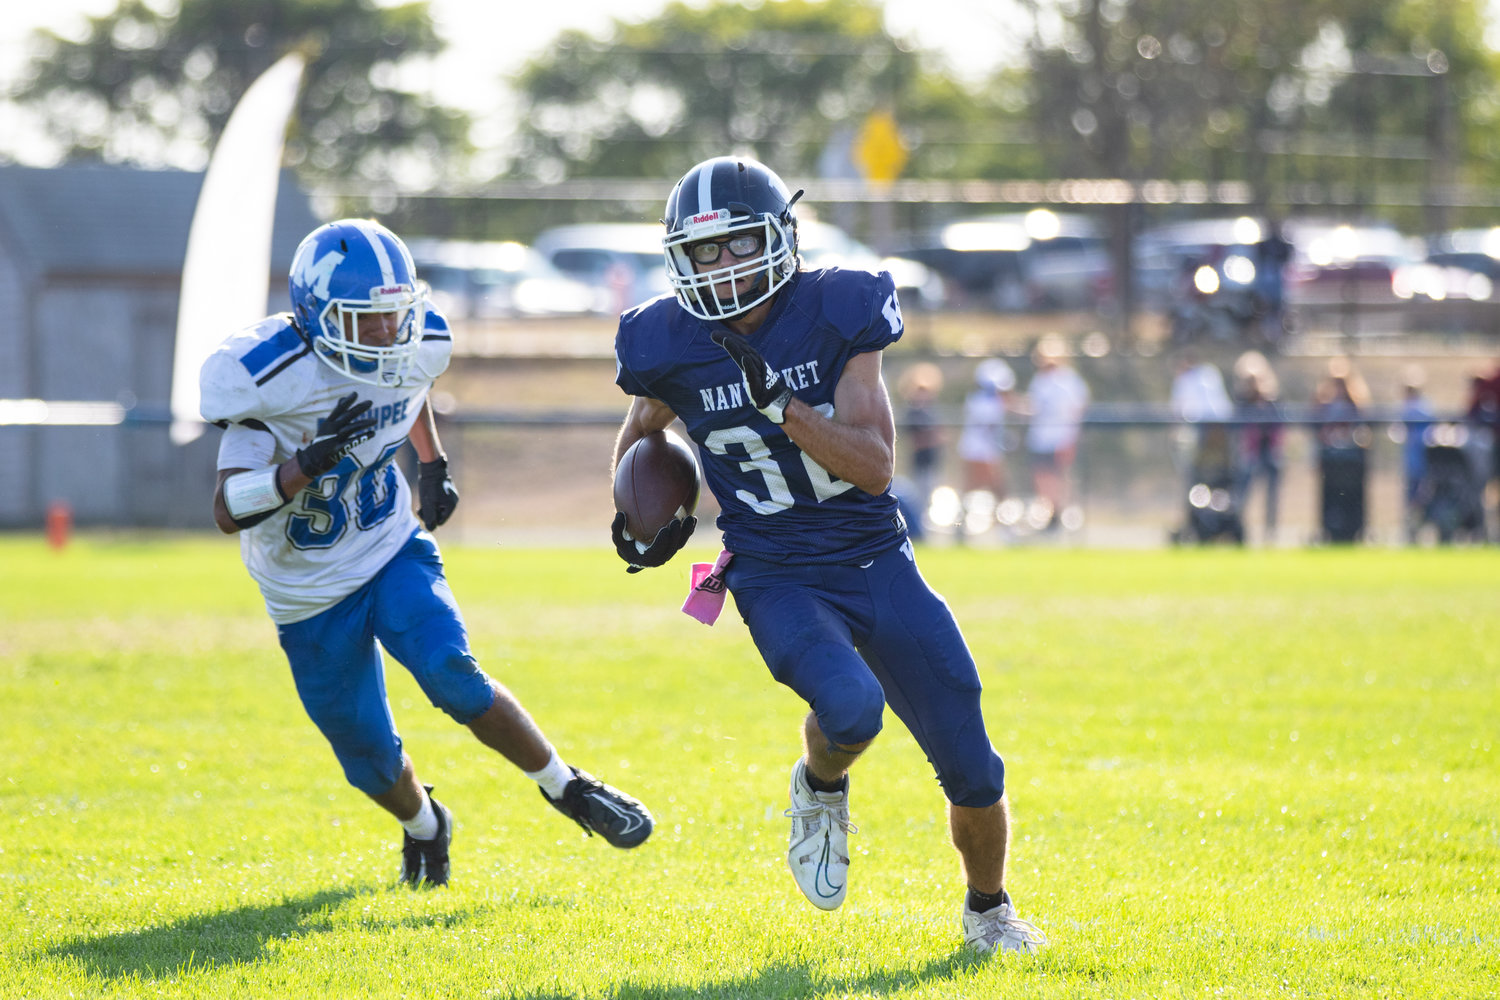 Griffin Fox ripped off a 46-yard touchdown run late in the second quarter Saturday against Mashpee.